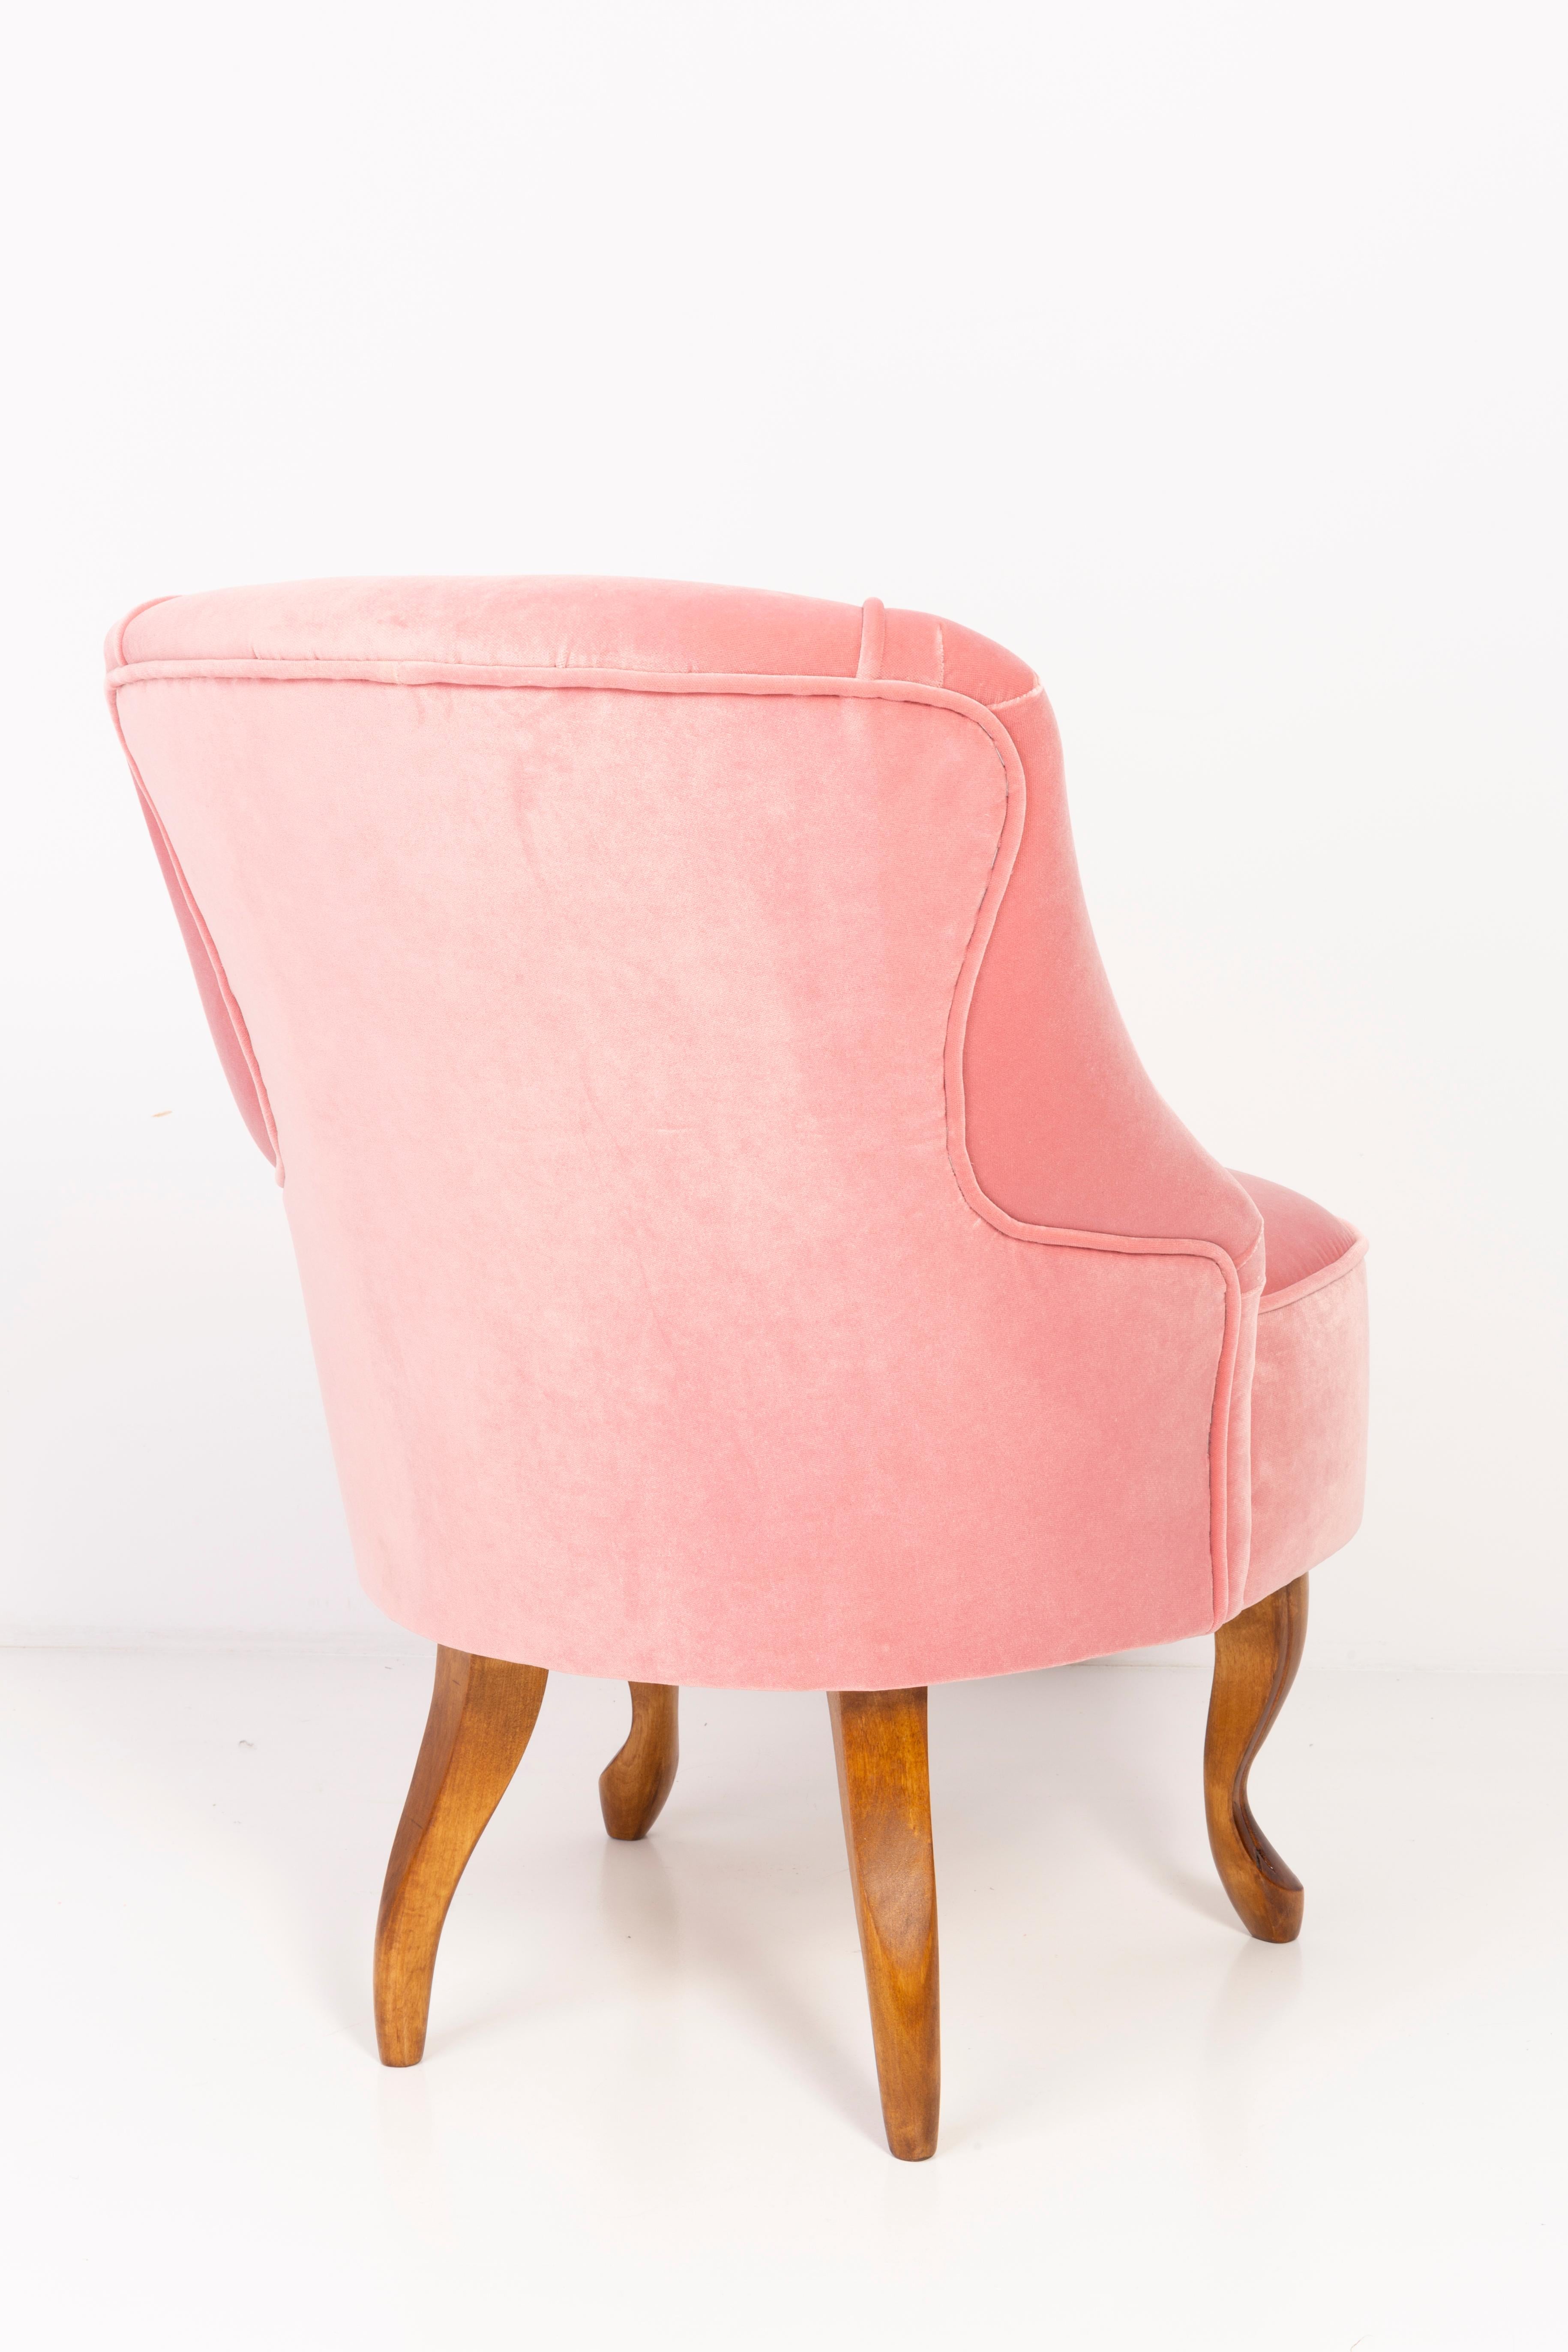 Velvet Set of Two 20th Century Art Deco Baby Pink Armchairs, 1950s For Sale